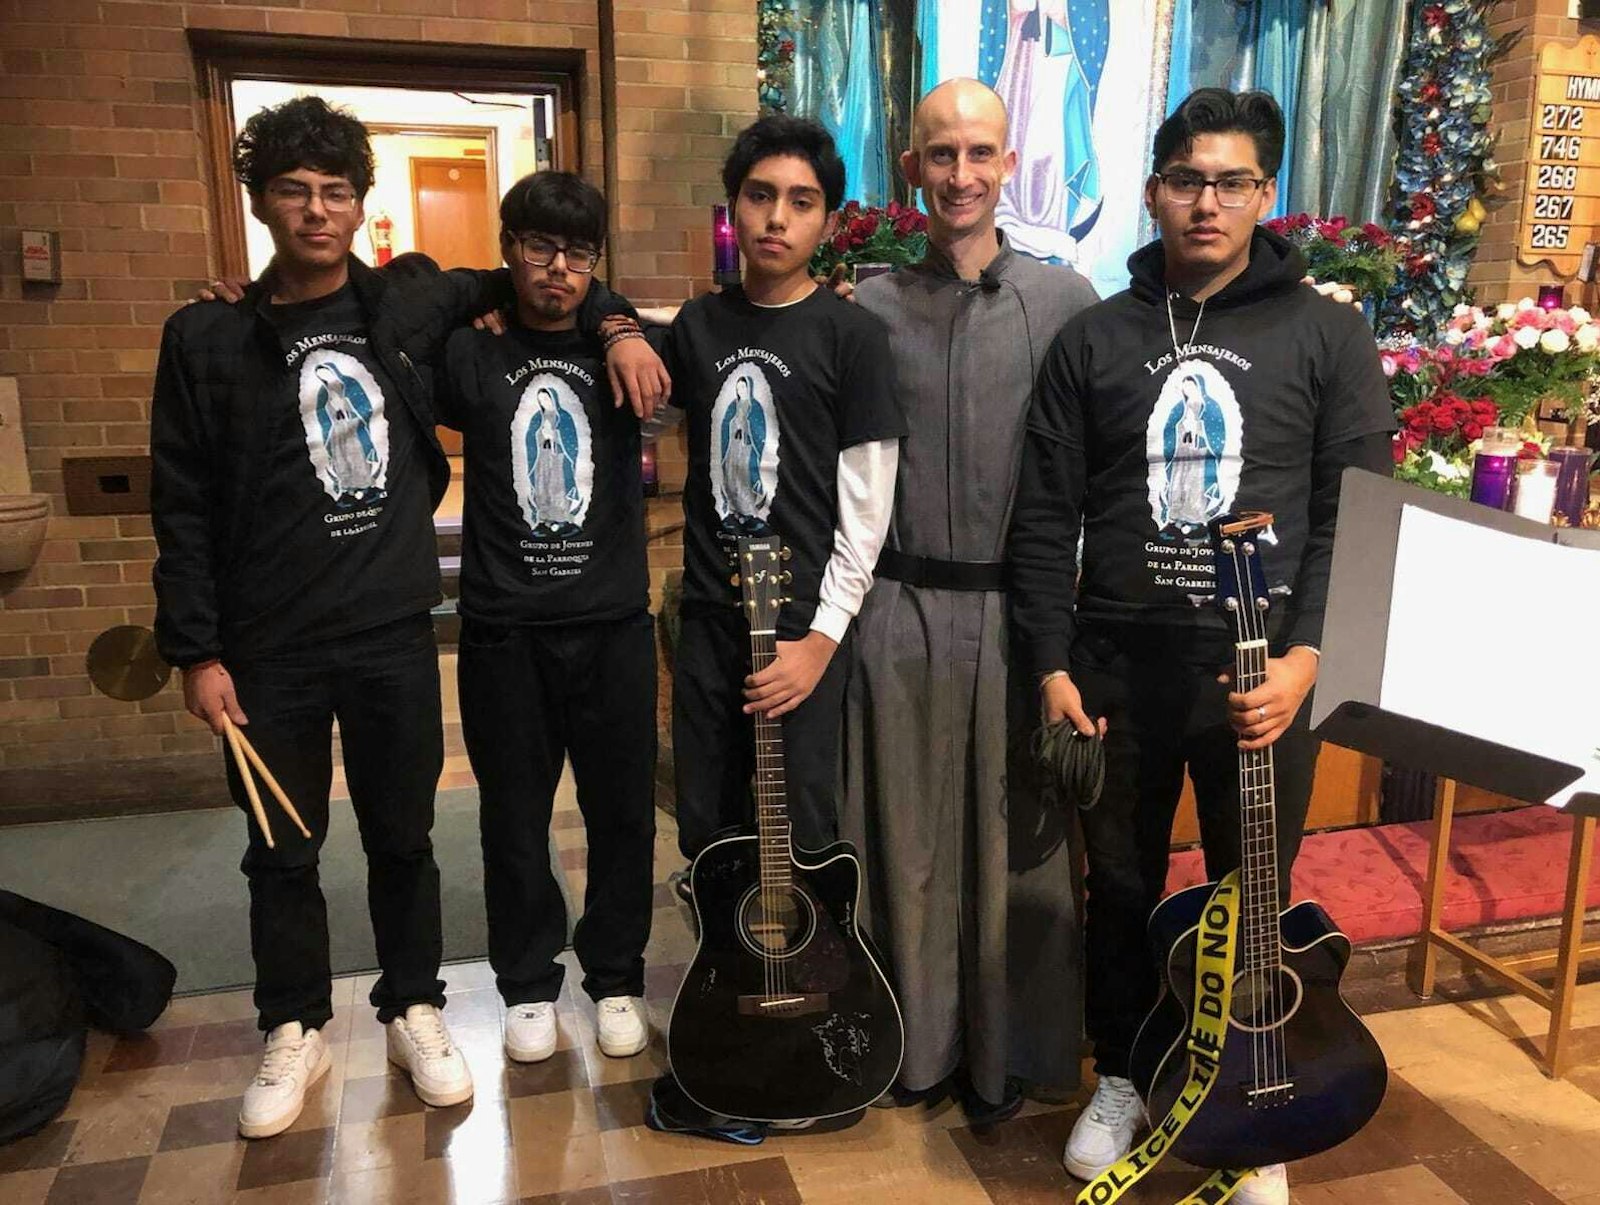 Left to right, Juan Pablo Durán, Jordy Durán, Ezequiel, Fr. Jeremy Davis, and Felipe Durán. These four young men are part of the youth group “Los Mensajeros” at St. Gabriel Church. For the past three years, they have been playing in honor of the Virgin of Guadalupe on Dec. 12. “We always try to support them. And these are the things that encourage us to continue; we don’t want the boys to drift away from their faith," explained Esmeralda Durán. (Photo courtesy of Esmeralda Durán)